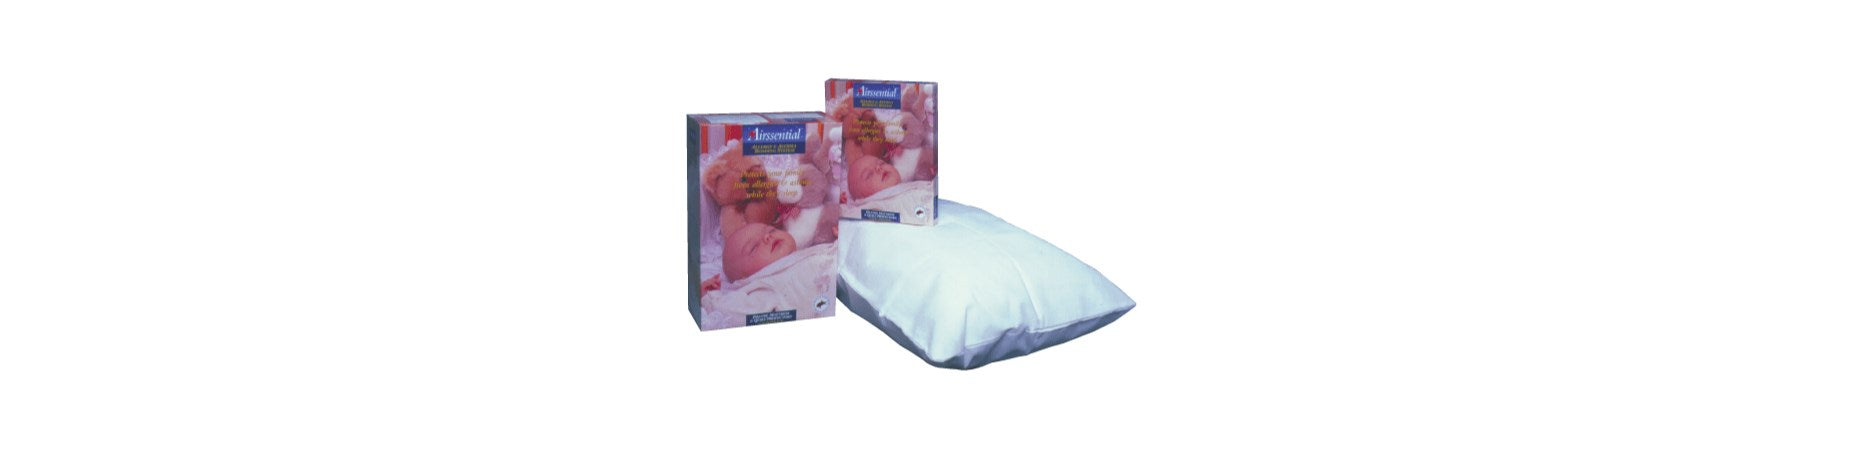 Asthma Bedding - Airssential Health Care